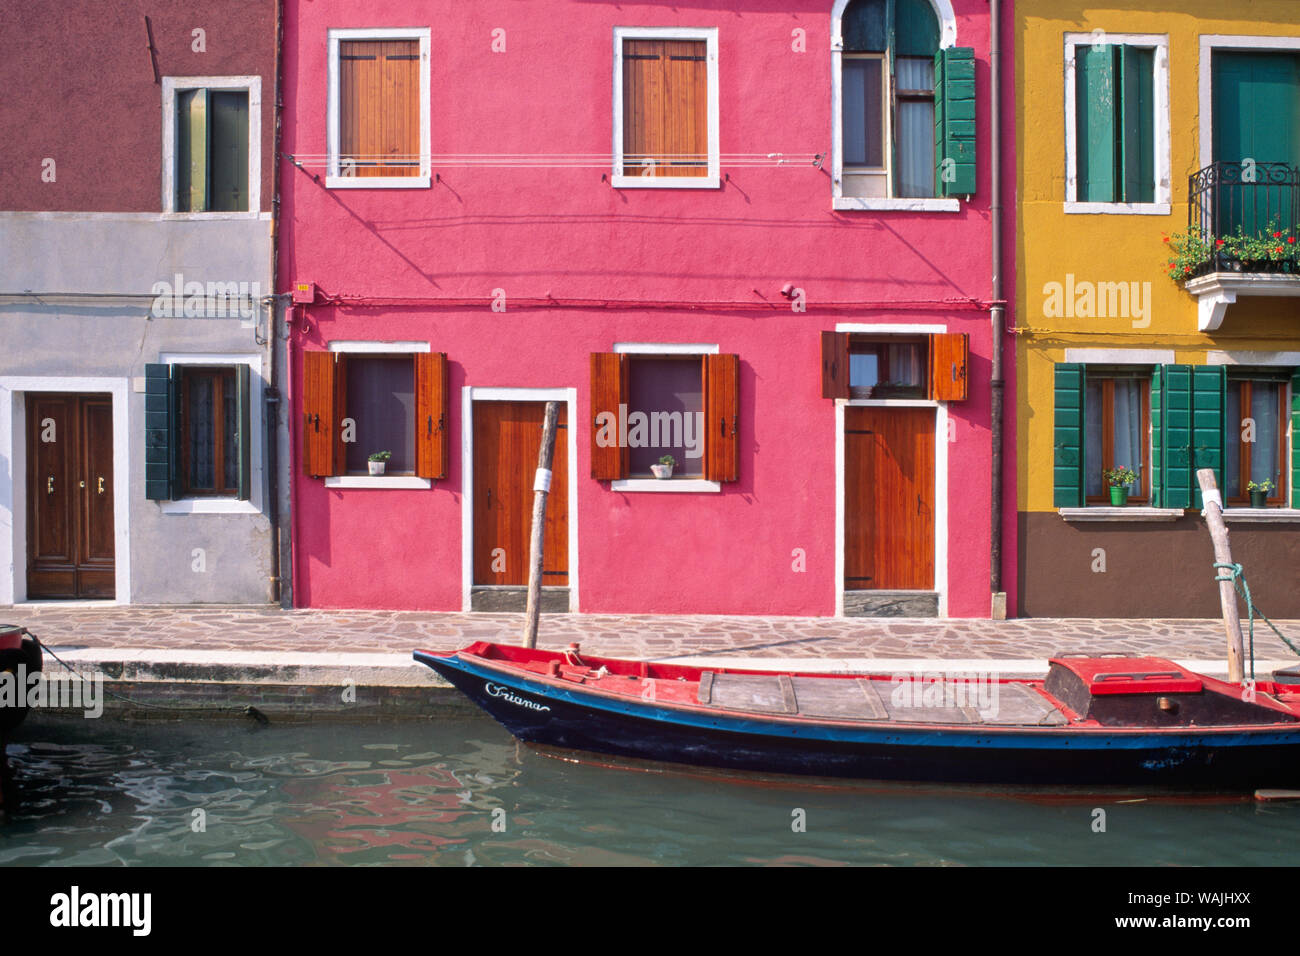 Italy, Burano. Colorful house exteriors and boat in canal. Credit as: Jim Nilsen / Jaynes Gallery / DanitaDelimont.com Stock Photo